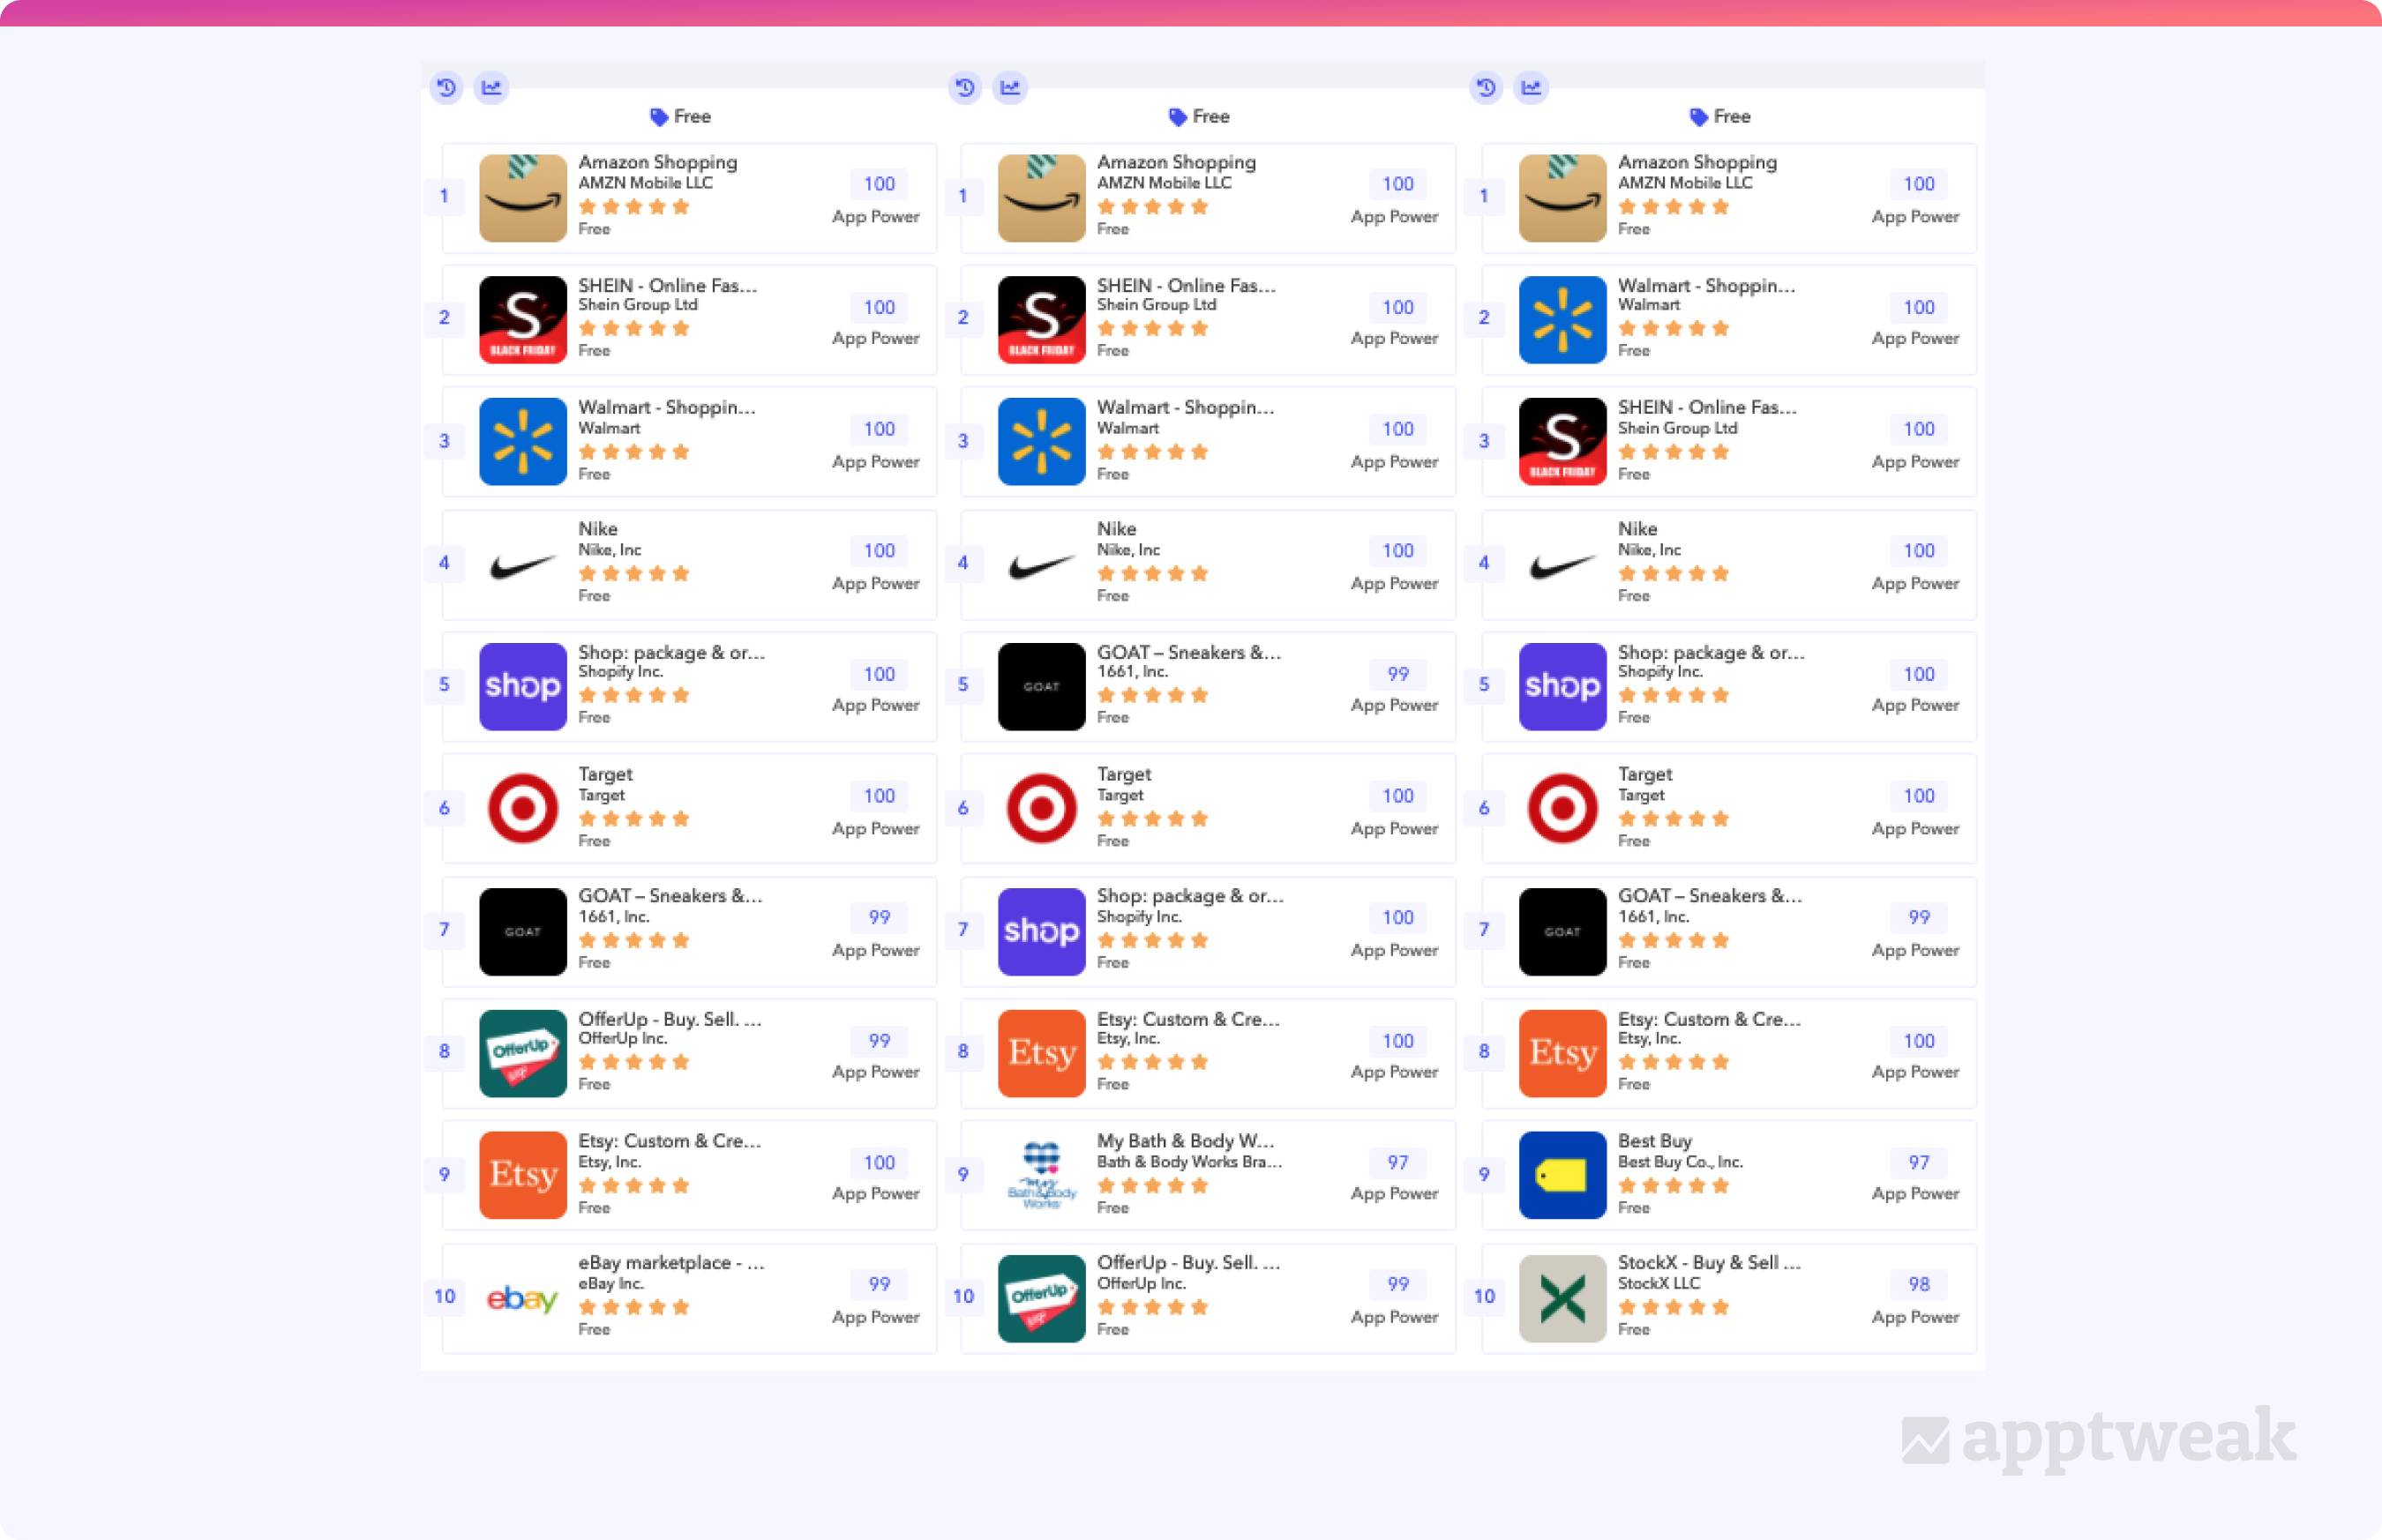 Category rankings in the US App Store Shopping category, Black Friday